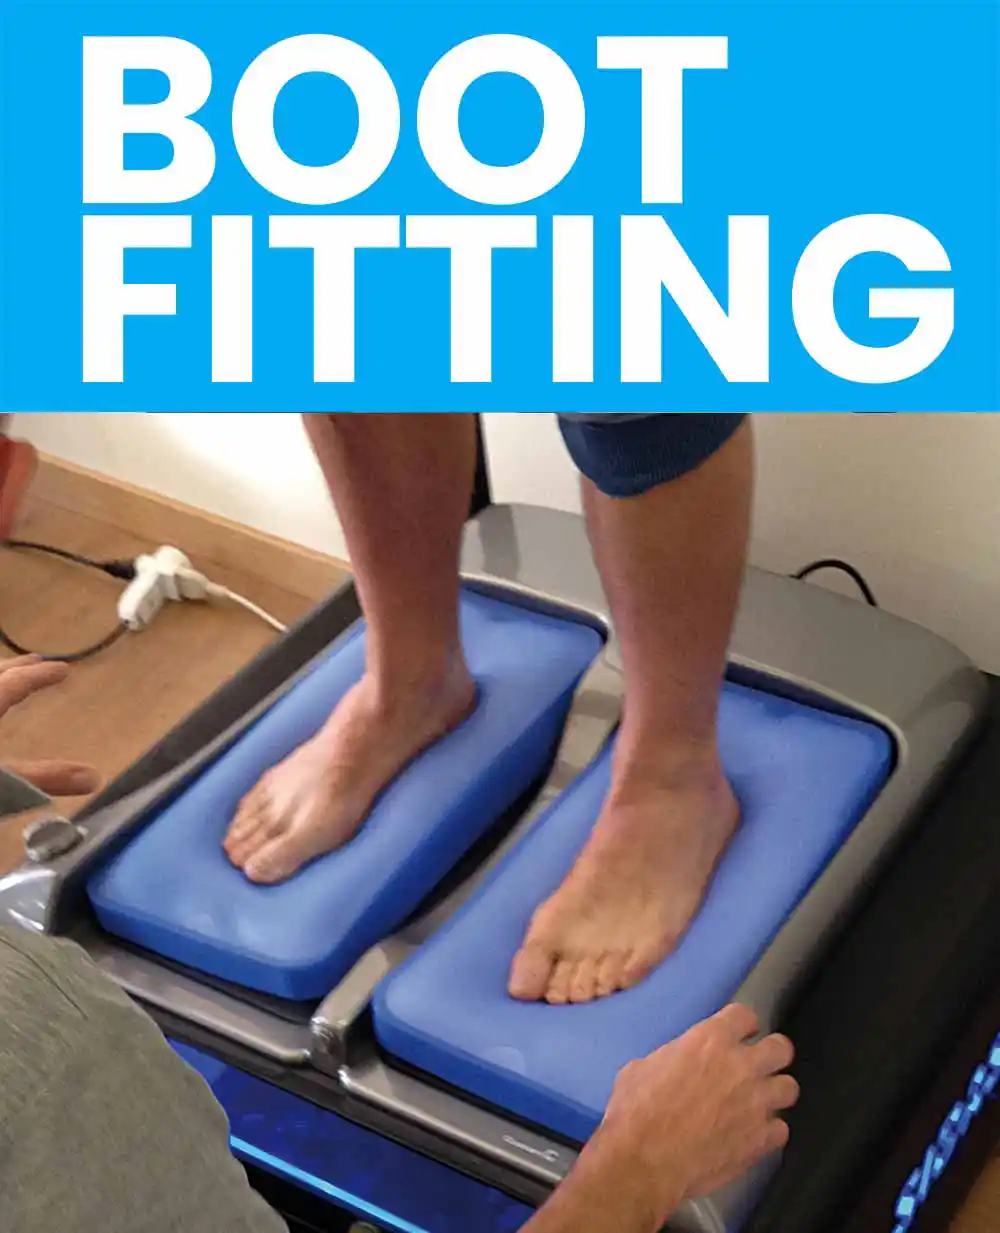 Boot fitting - analisi del piede